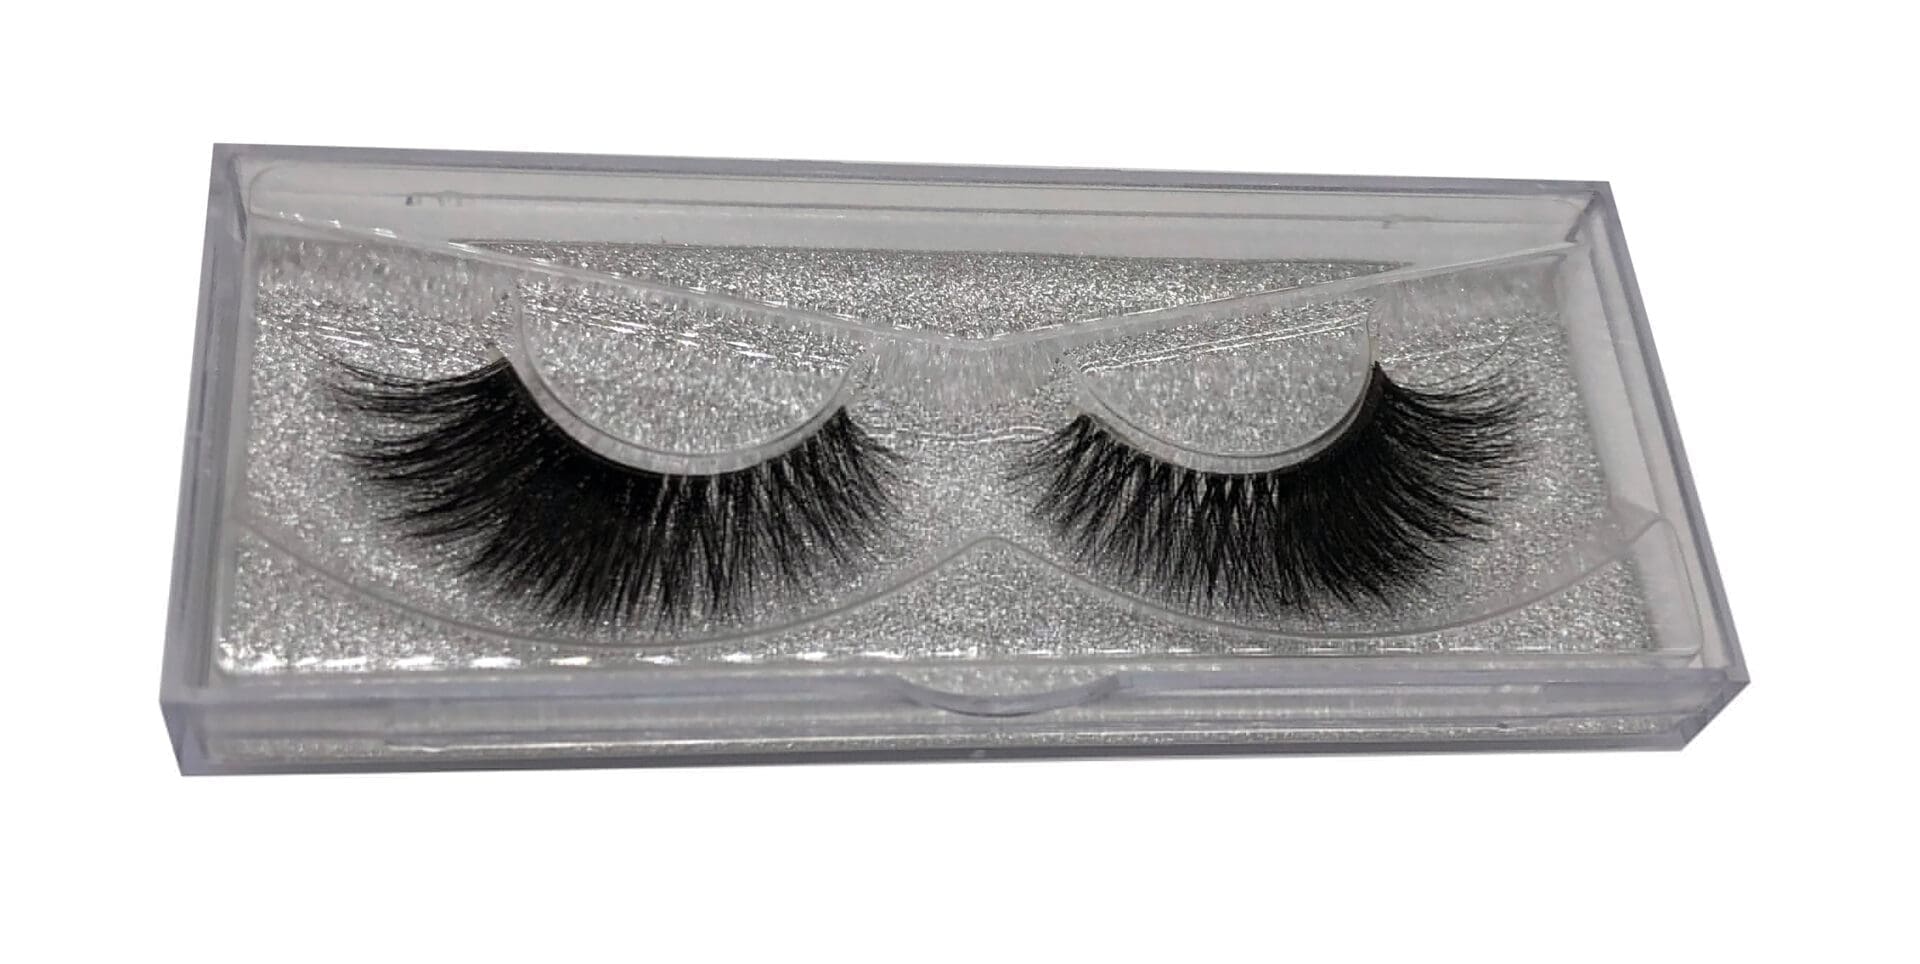 A pair of false eyelashes in silver glitter storage